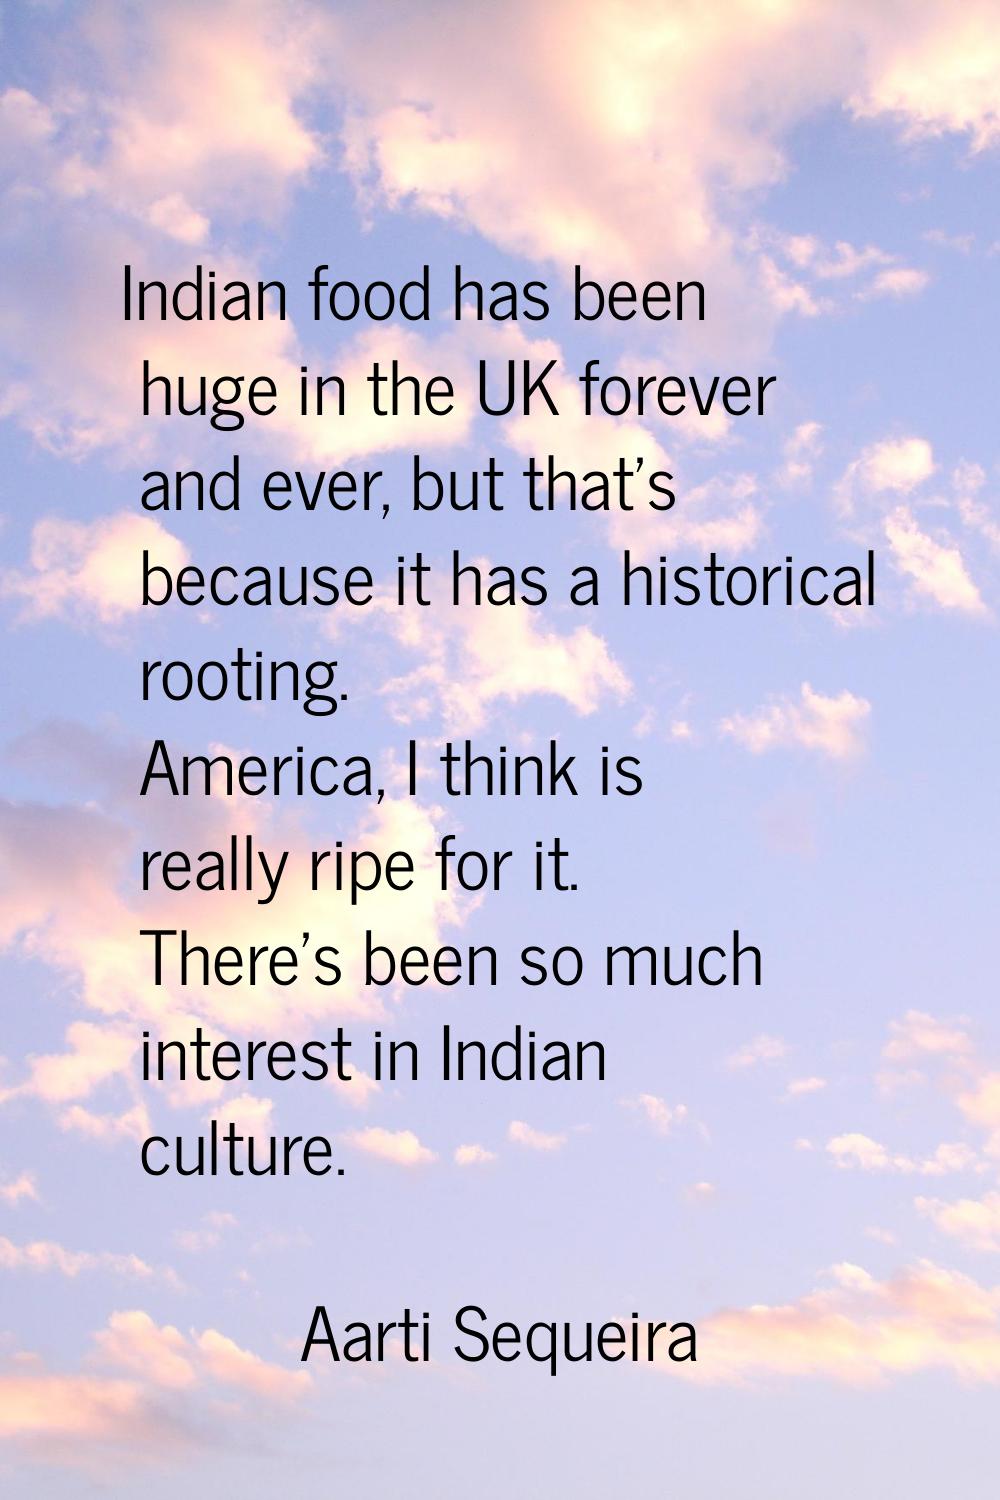 Indian food has been huge in the UK forever and ever, but that's because it has a historical rootin